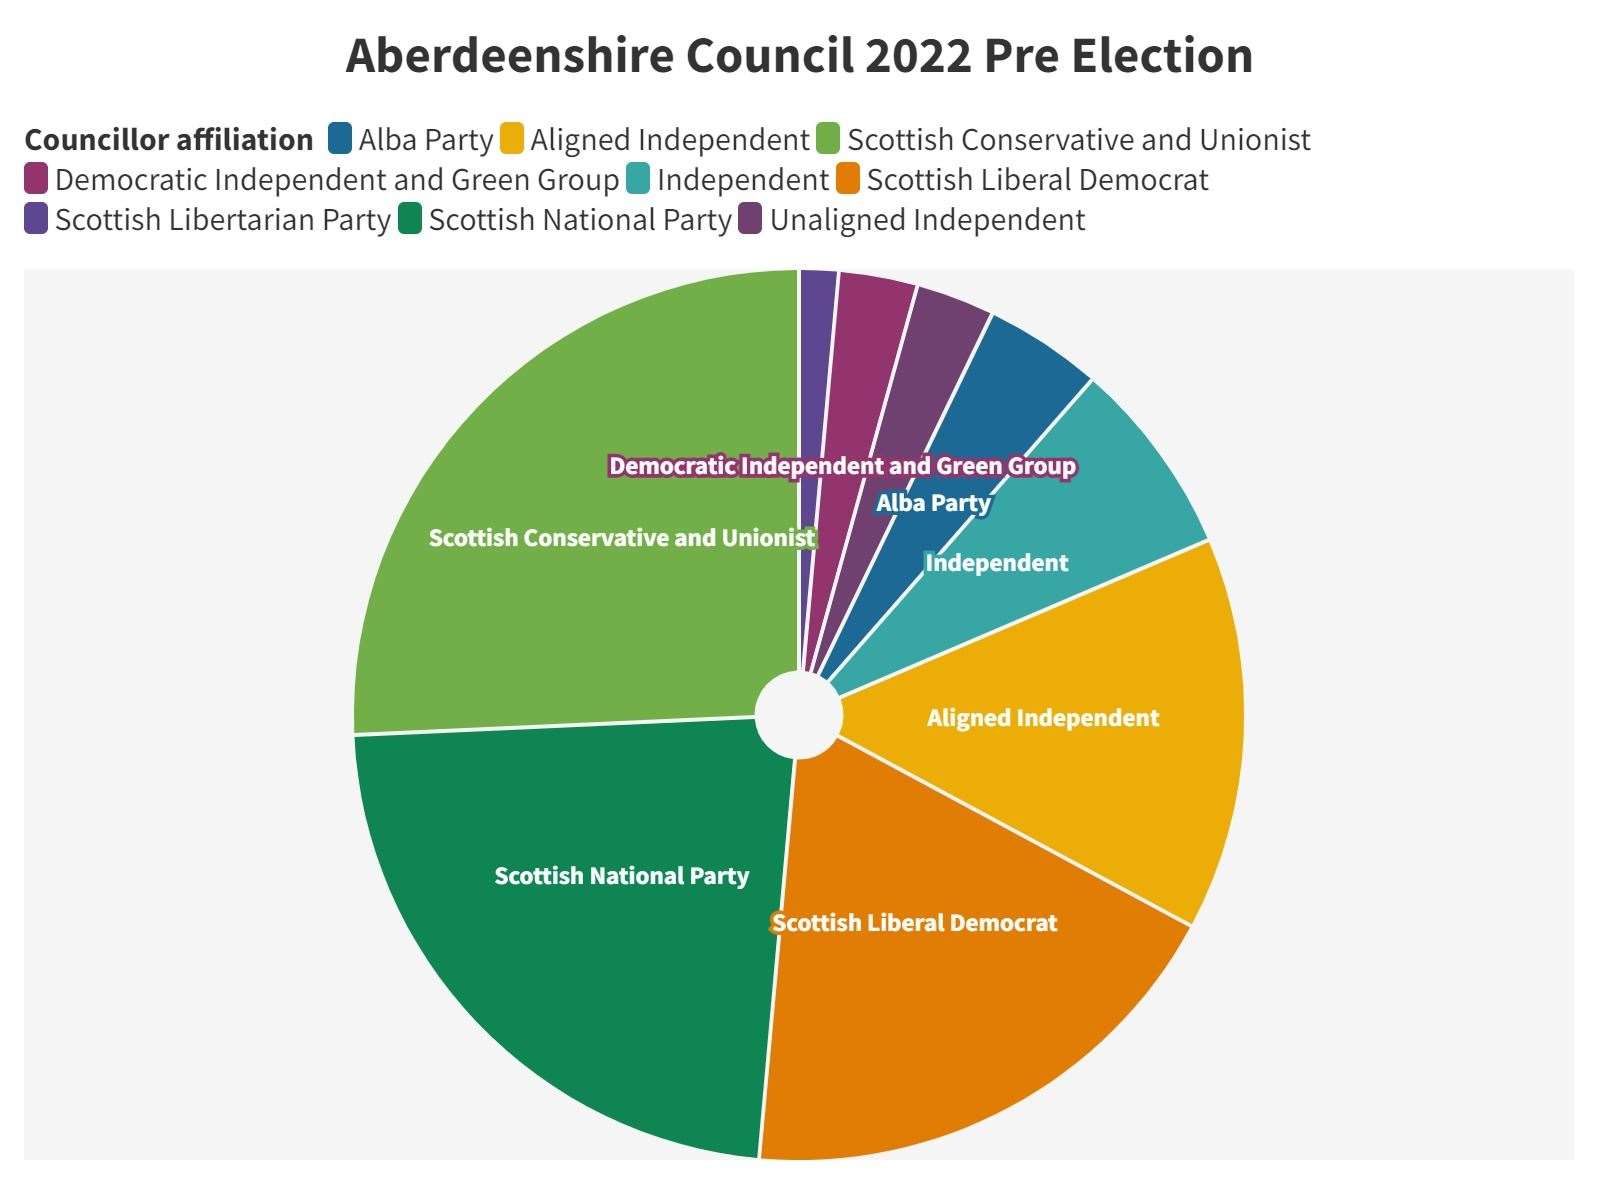 The current balance of constituent members of Aberdeenshire Council.